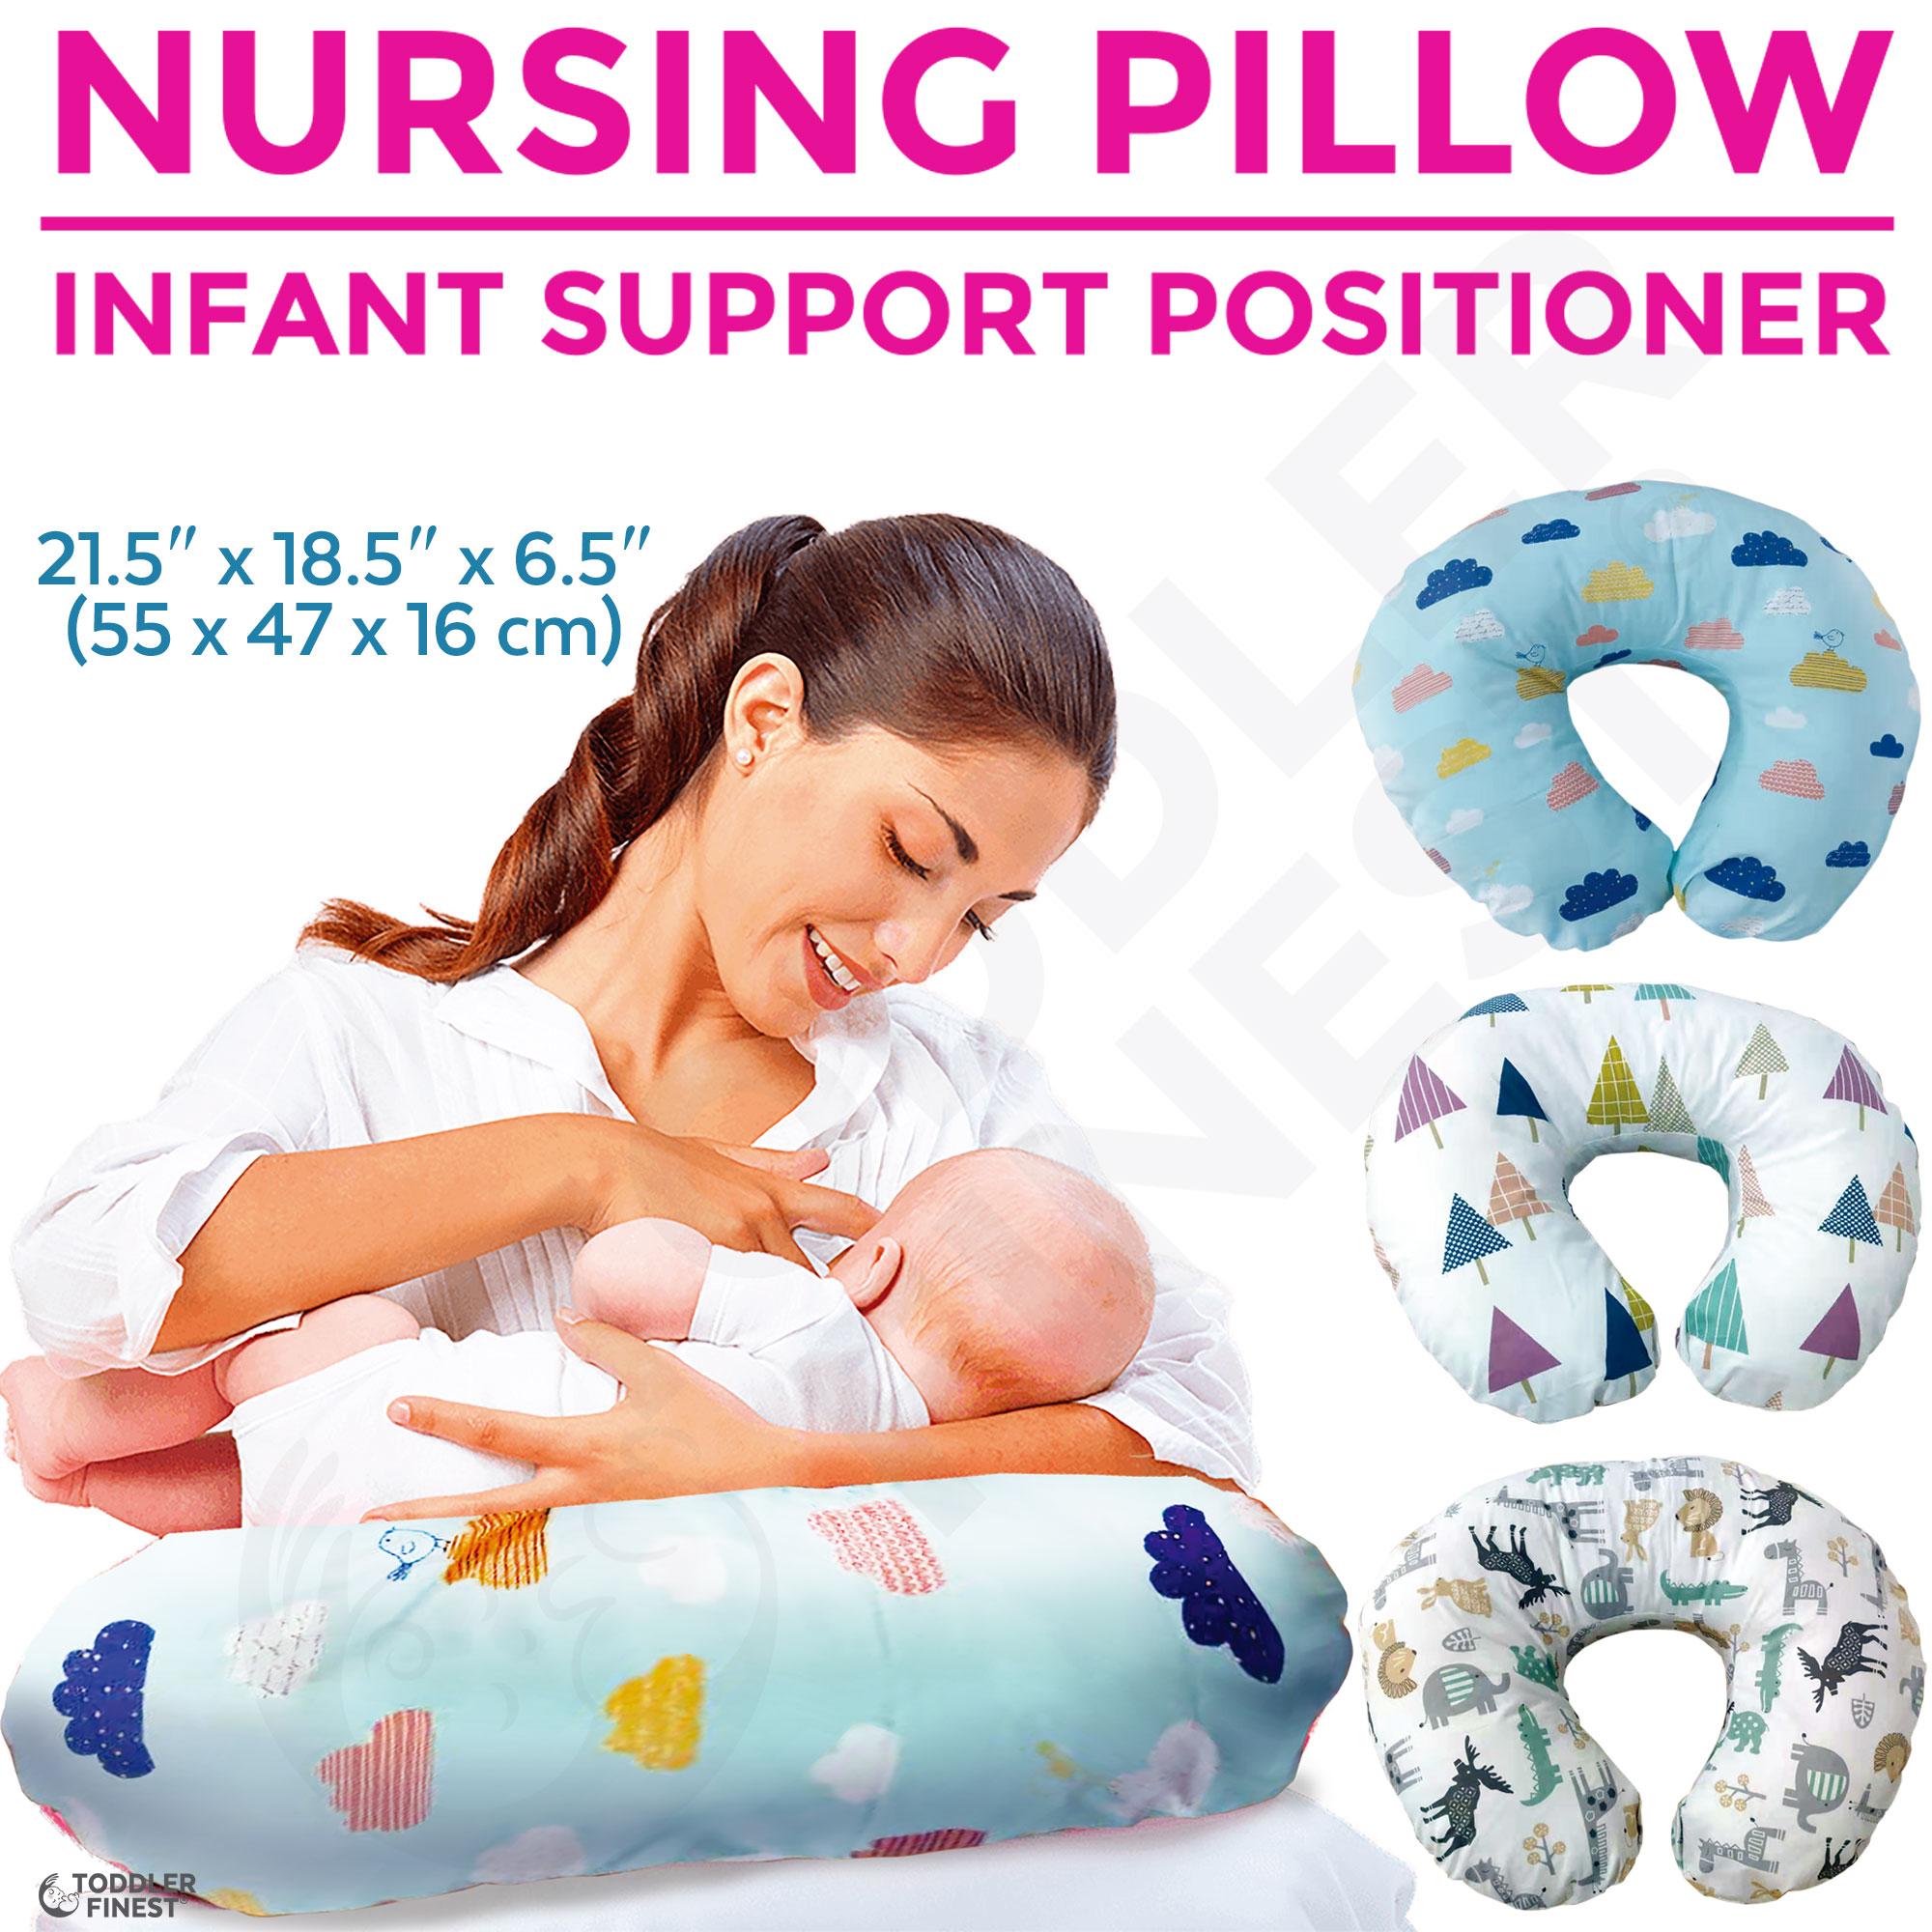 Ergonomic Portable Lightweight Hypoallergenic Washable Soft Breathable 100% Cotton Cover Breastfeeding Arm Pillow Forest Nursing Pillow and Positioner Infant Support Newborn Feeding Cushion 